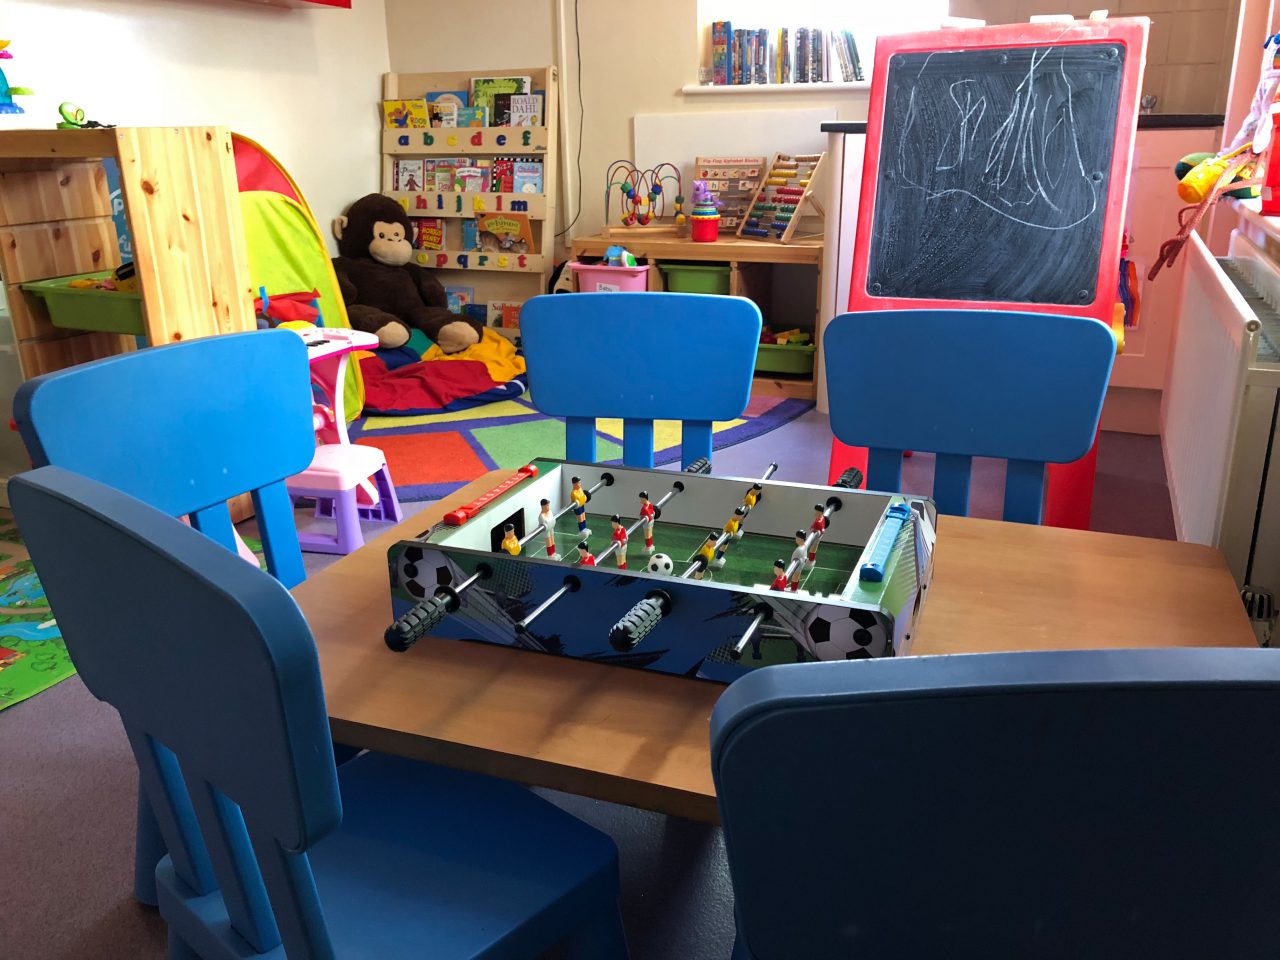 Children's toy room with a table and five blue chairs. In the background are lots of colourful toys and a blackboard.